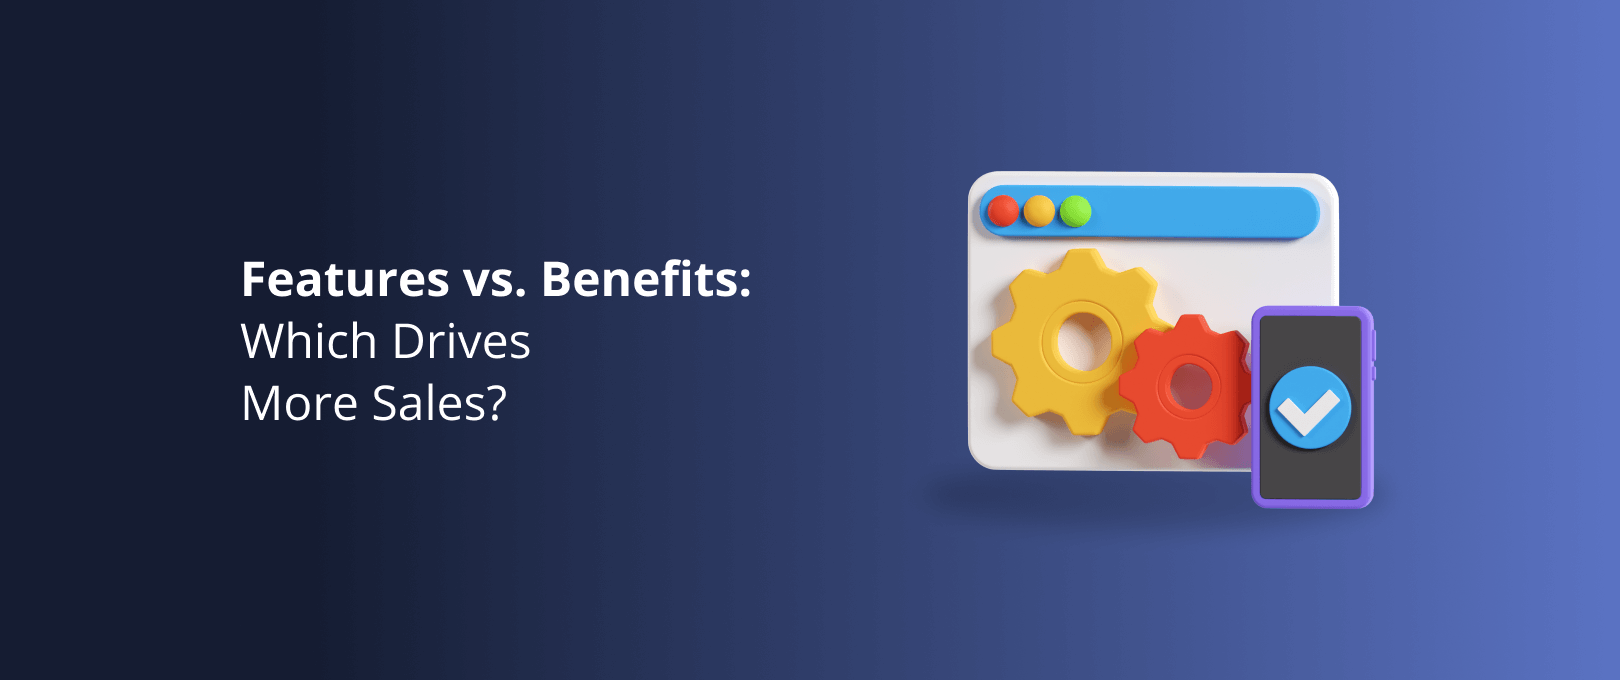 Features vs Benefits: What's the Difference & Why Does it Matter?